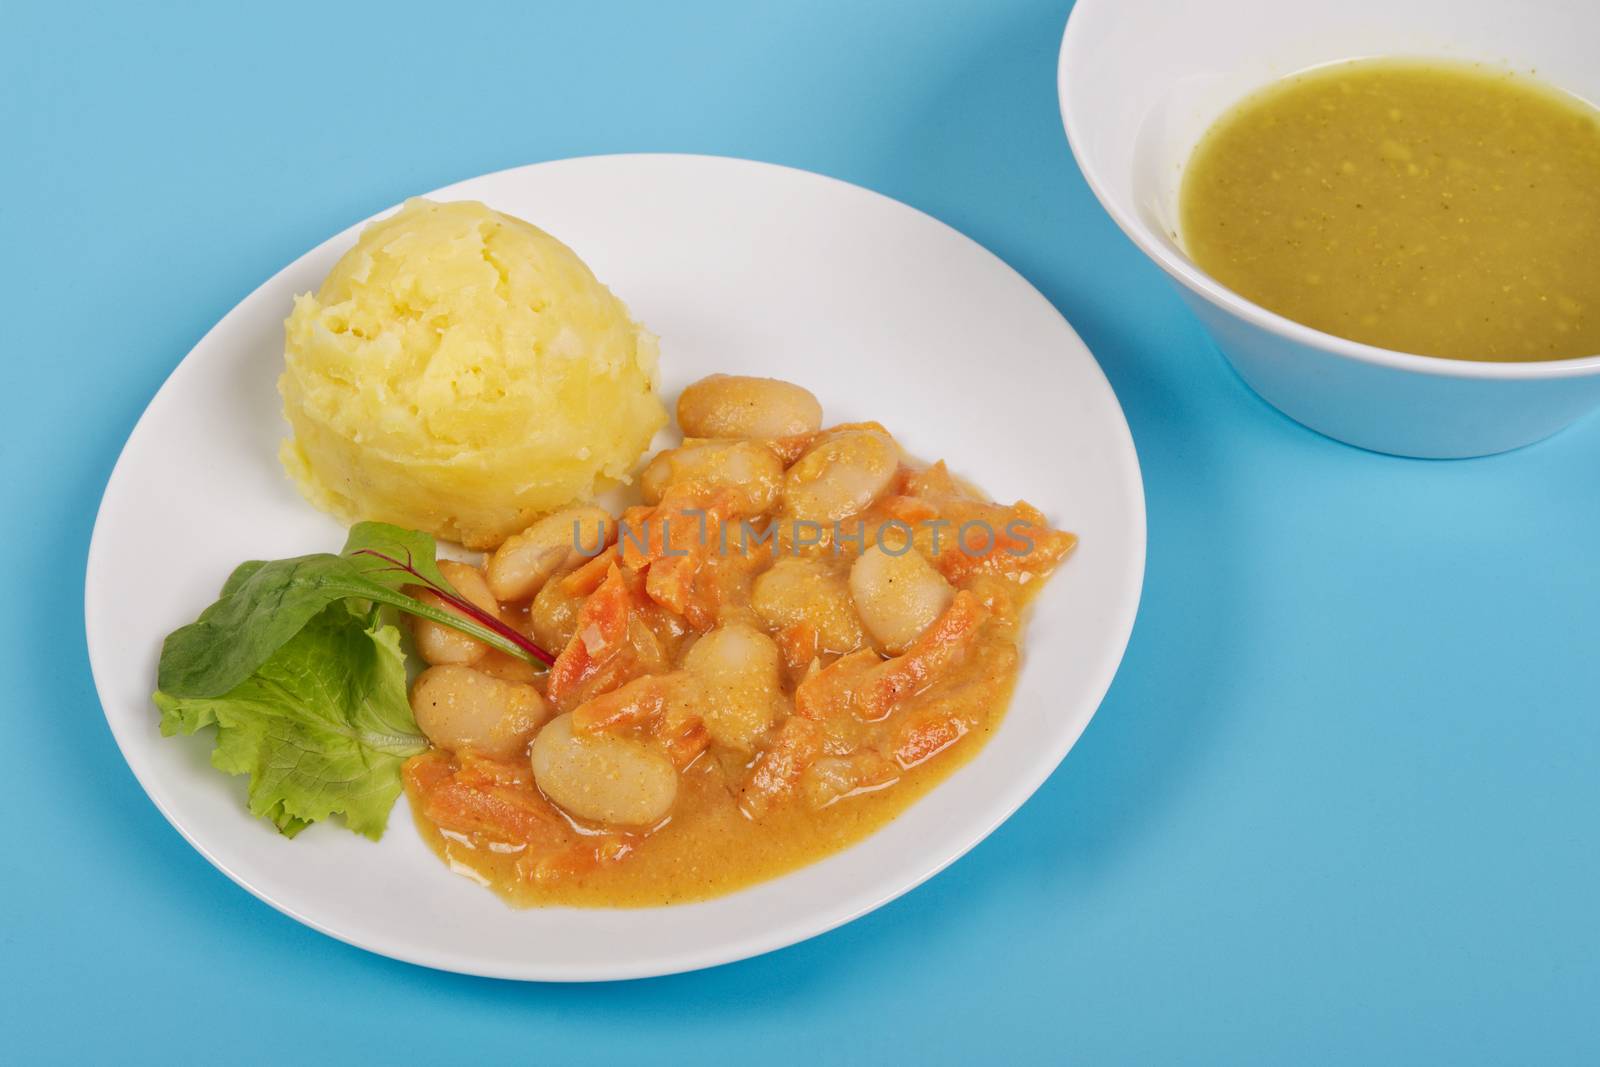 Beans with carrots and potatoes on a blue background